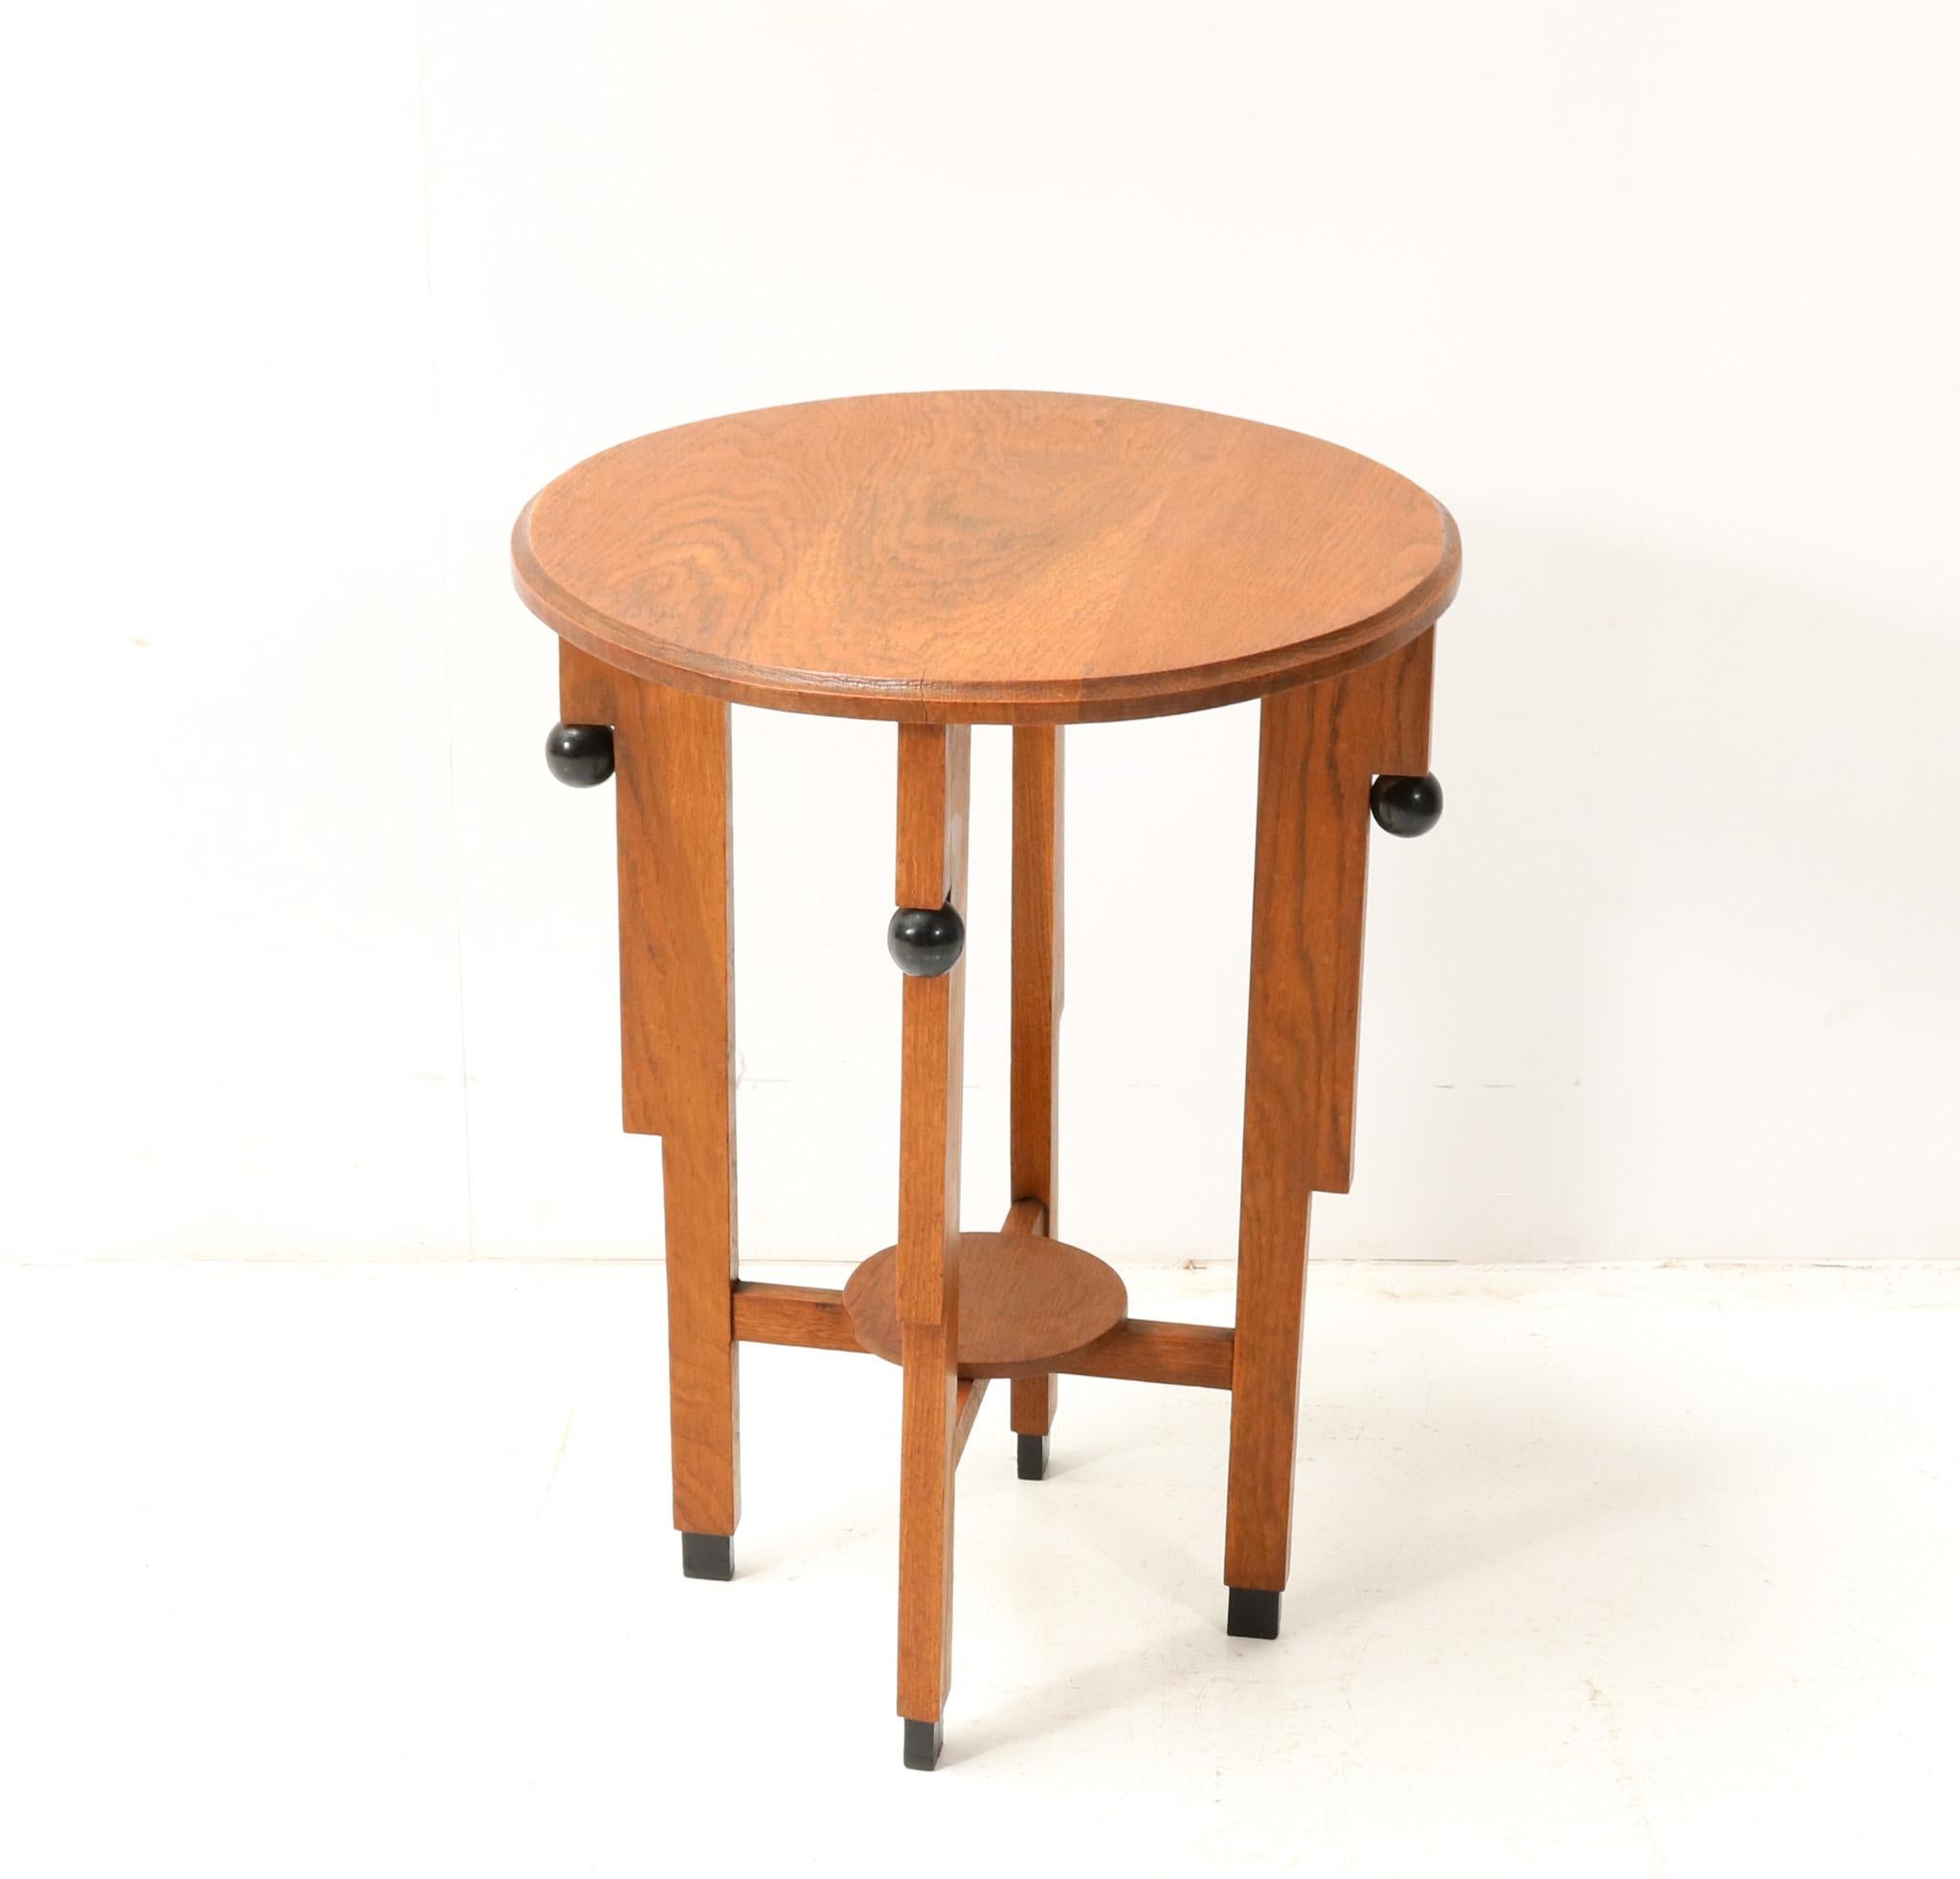 Stunning and rare Art Deco Amsterdamse School side table.
Striking Dutch design from the 1920s.
Solid oak base and top with original black lacquered elements.
This wonderful Art Deco Amsterdamse School side table is in very good original